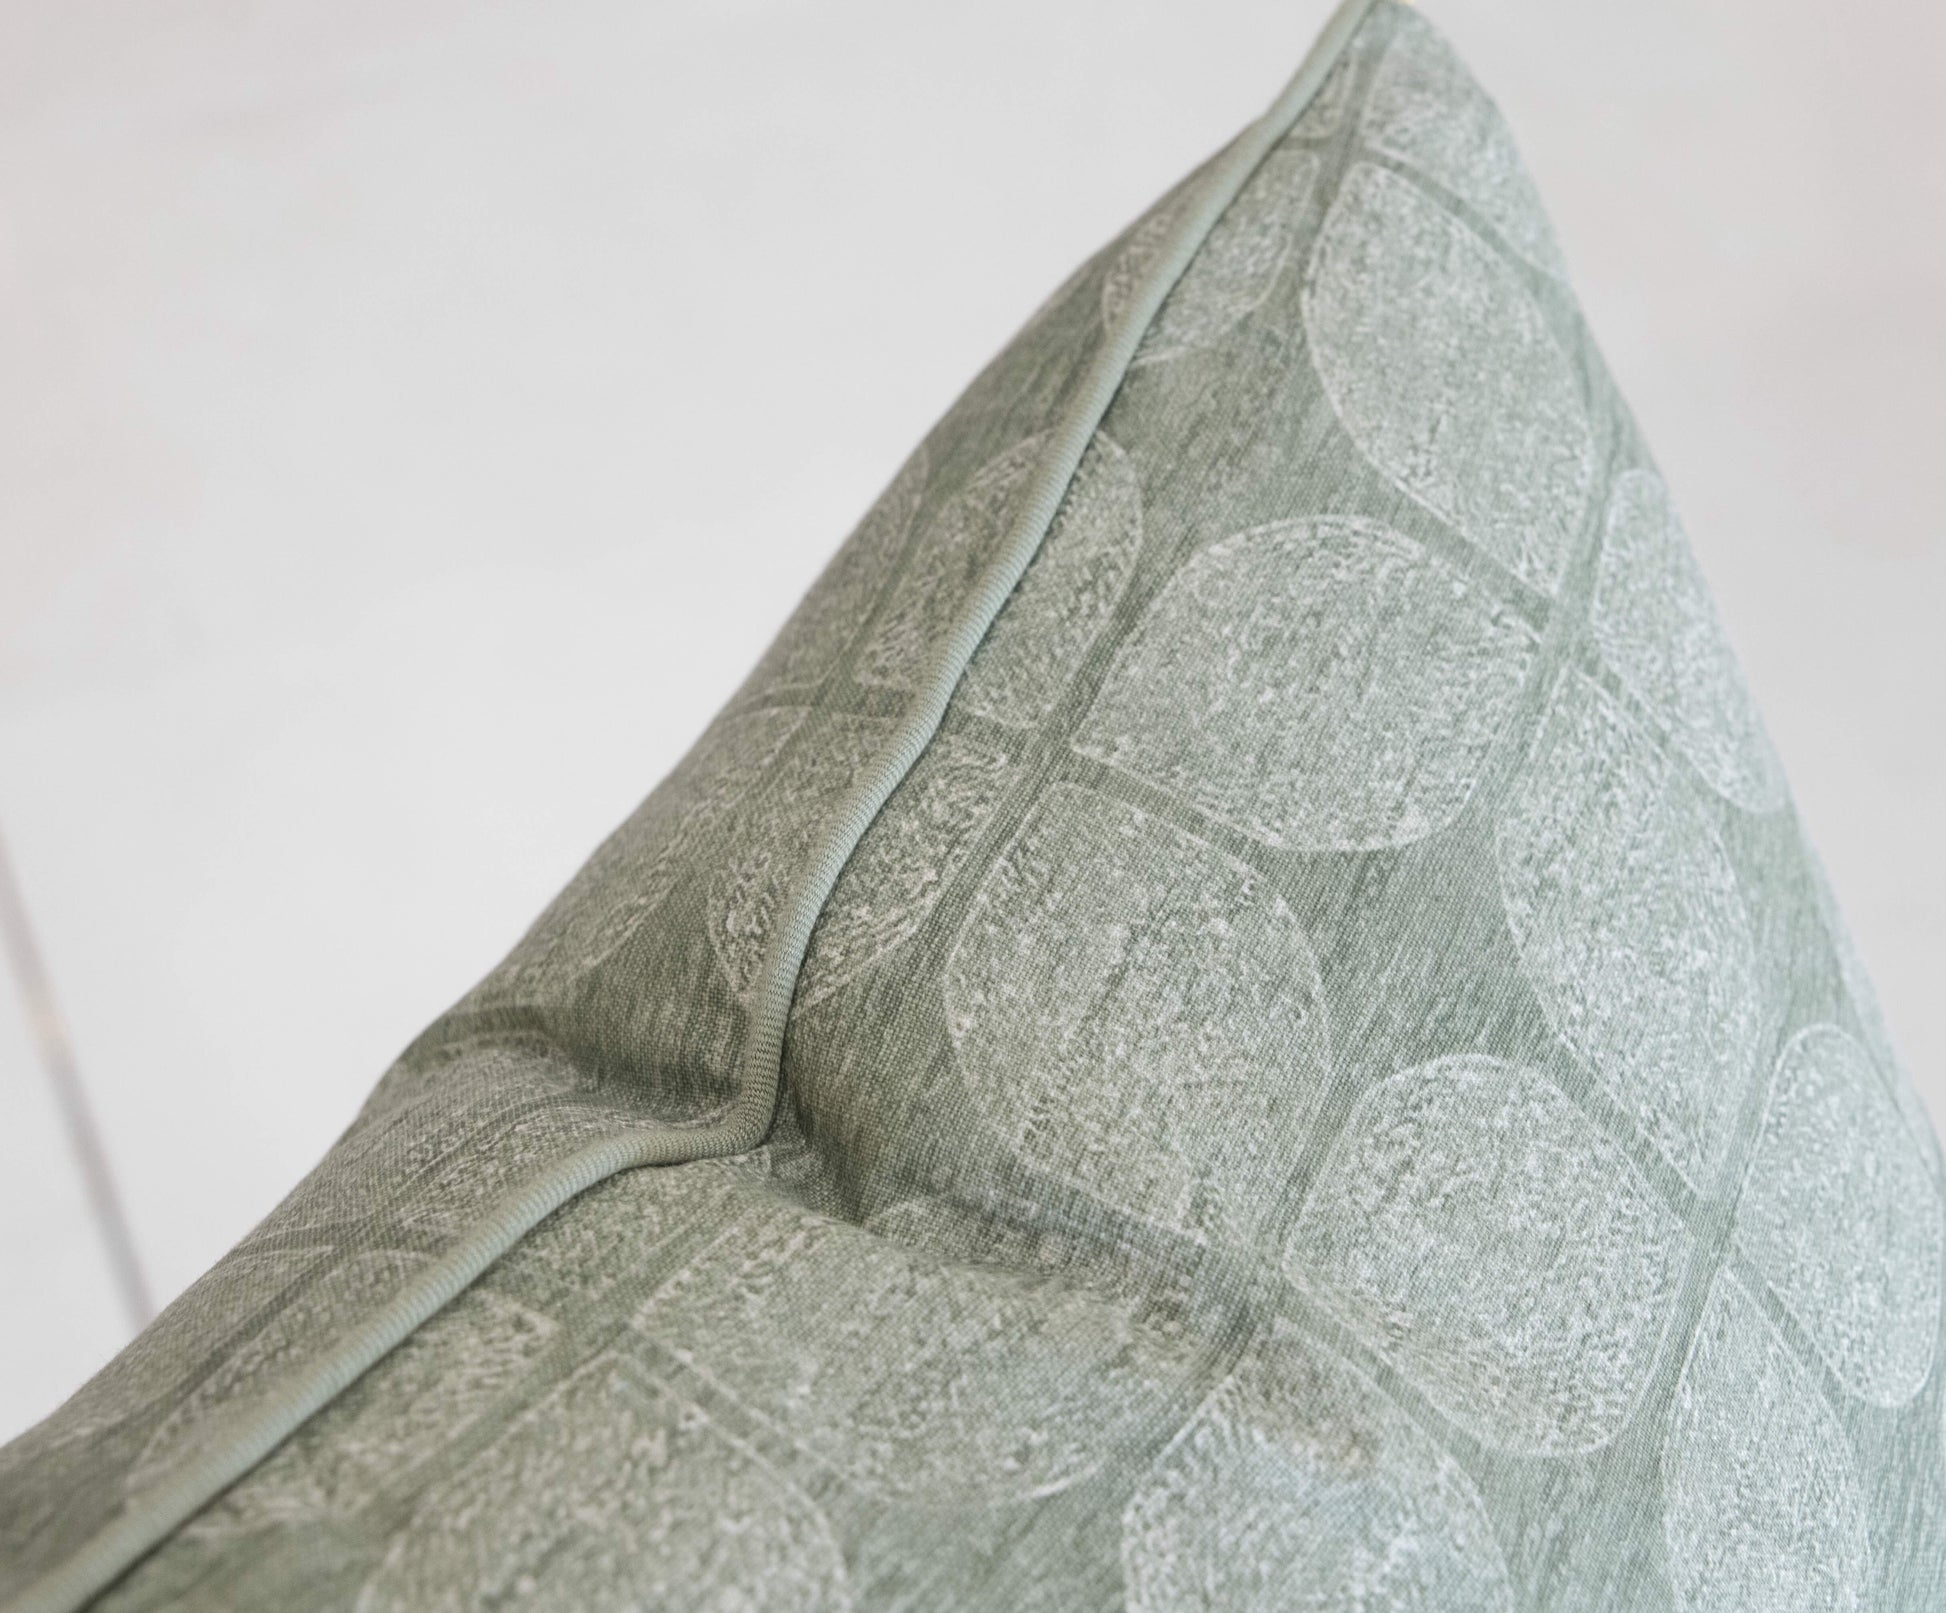 Close-up of a Petaluma Moss Pillow with a textured, circular pattern, custom-made from the finest materials and crafted with special attention to detail, against a light background.